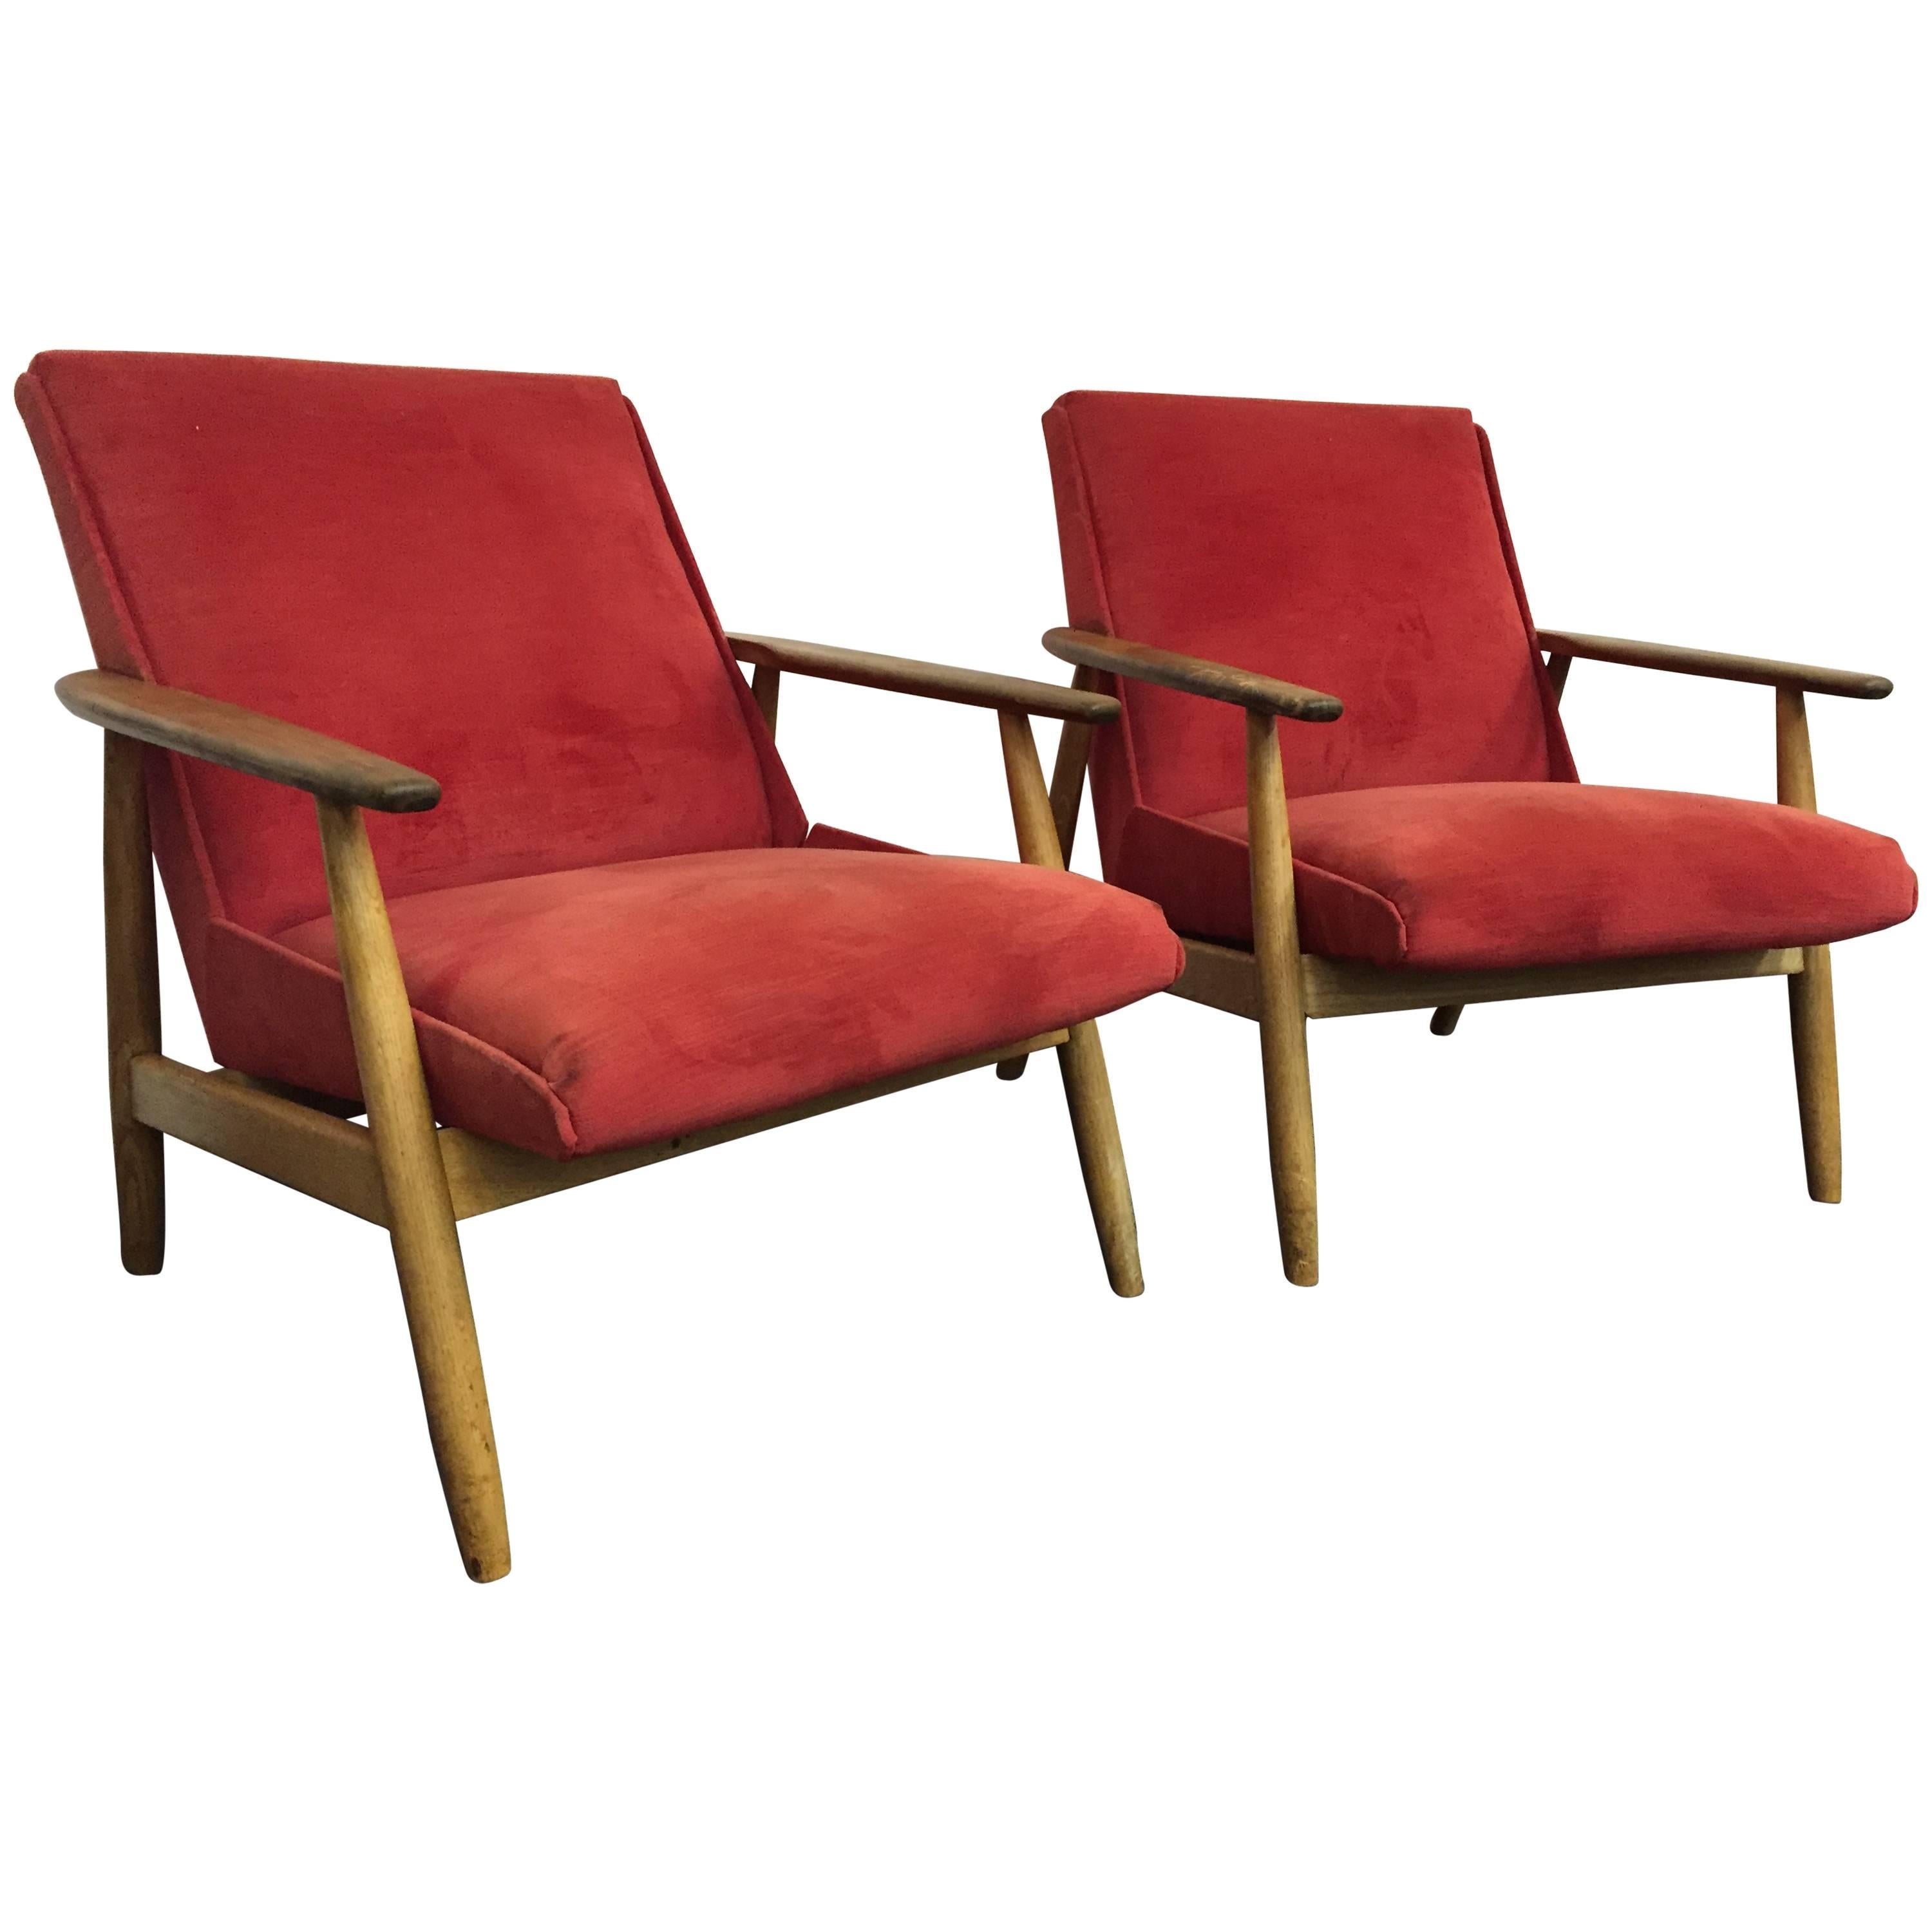 Pair of Danish Modern Armchairs in Original Red Upholstery, circa 1960 For Sale